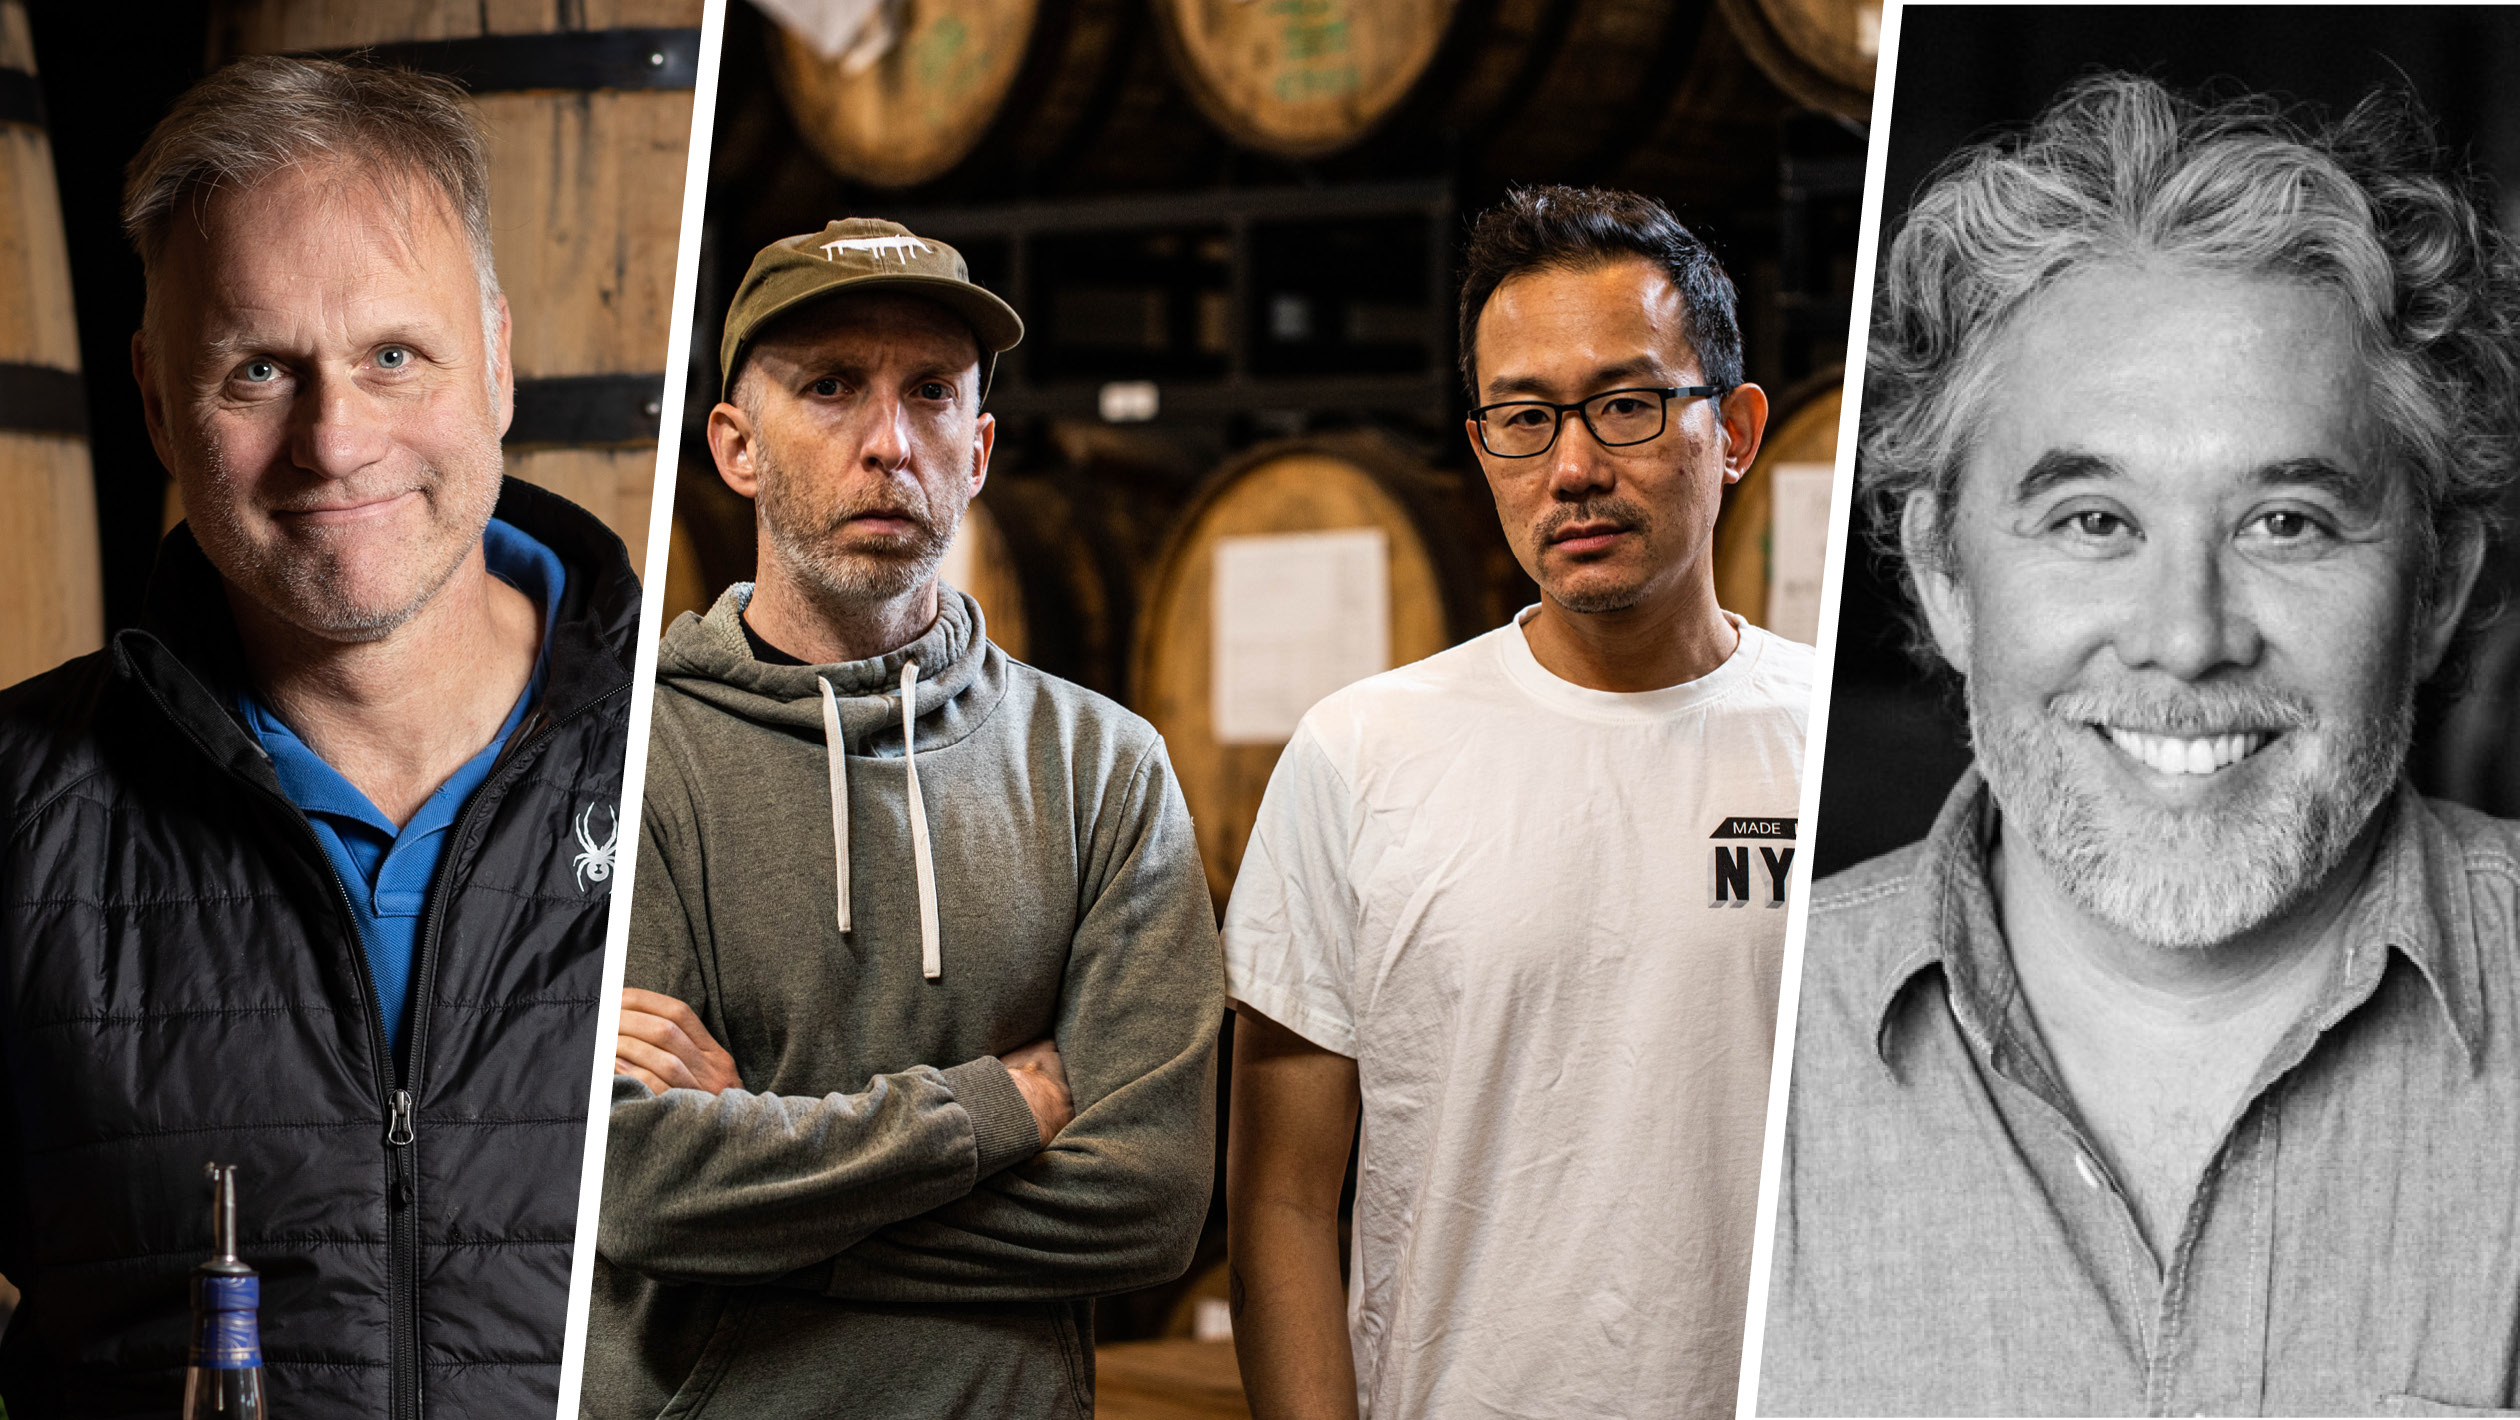 From left to right: Alastair Brogan, the founder of Zephyr Spirits (photo courtesy of Alastair Brogan); Kevin Finback and Basil Lee, the cofounders of Finback Brewery (photo credit Jose Manchola); and Sashi Moorman, the cofounder of Domaine de la Côte, Sandhi and Evening Land (photo courtesy of Sashi Moorman).